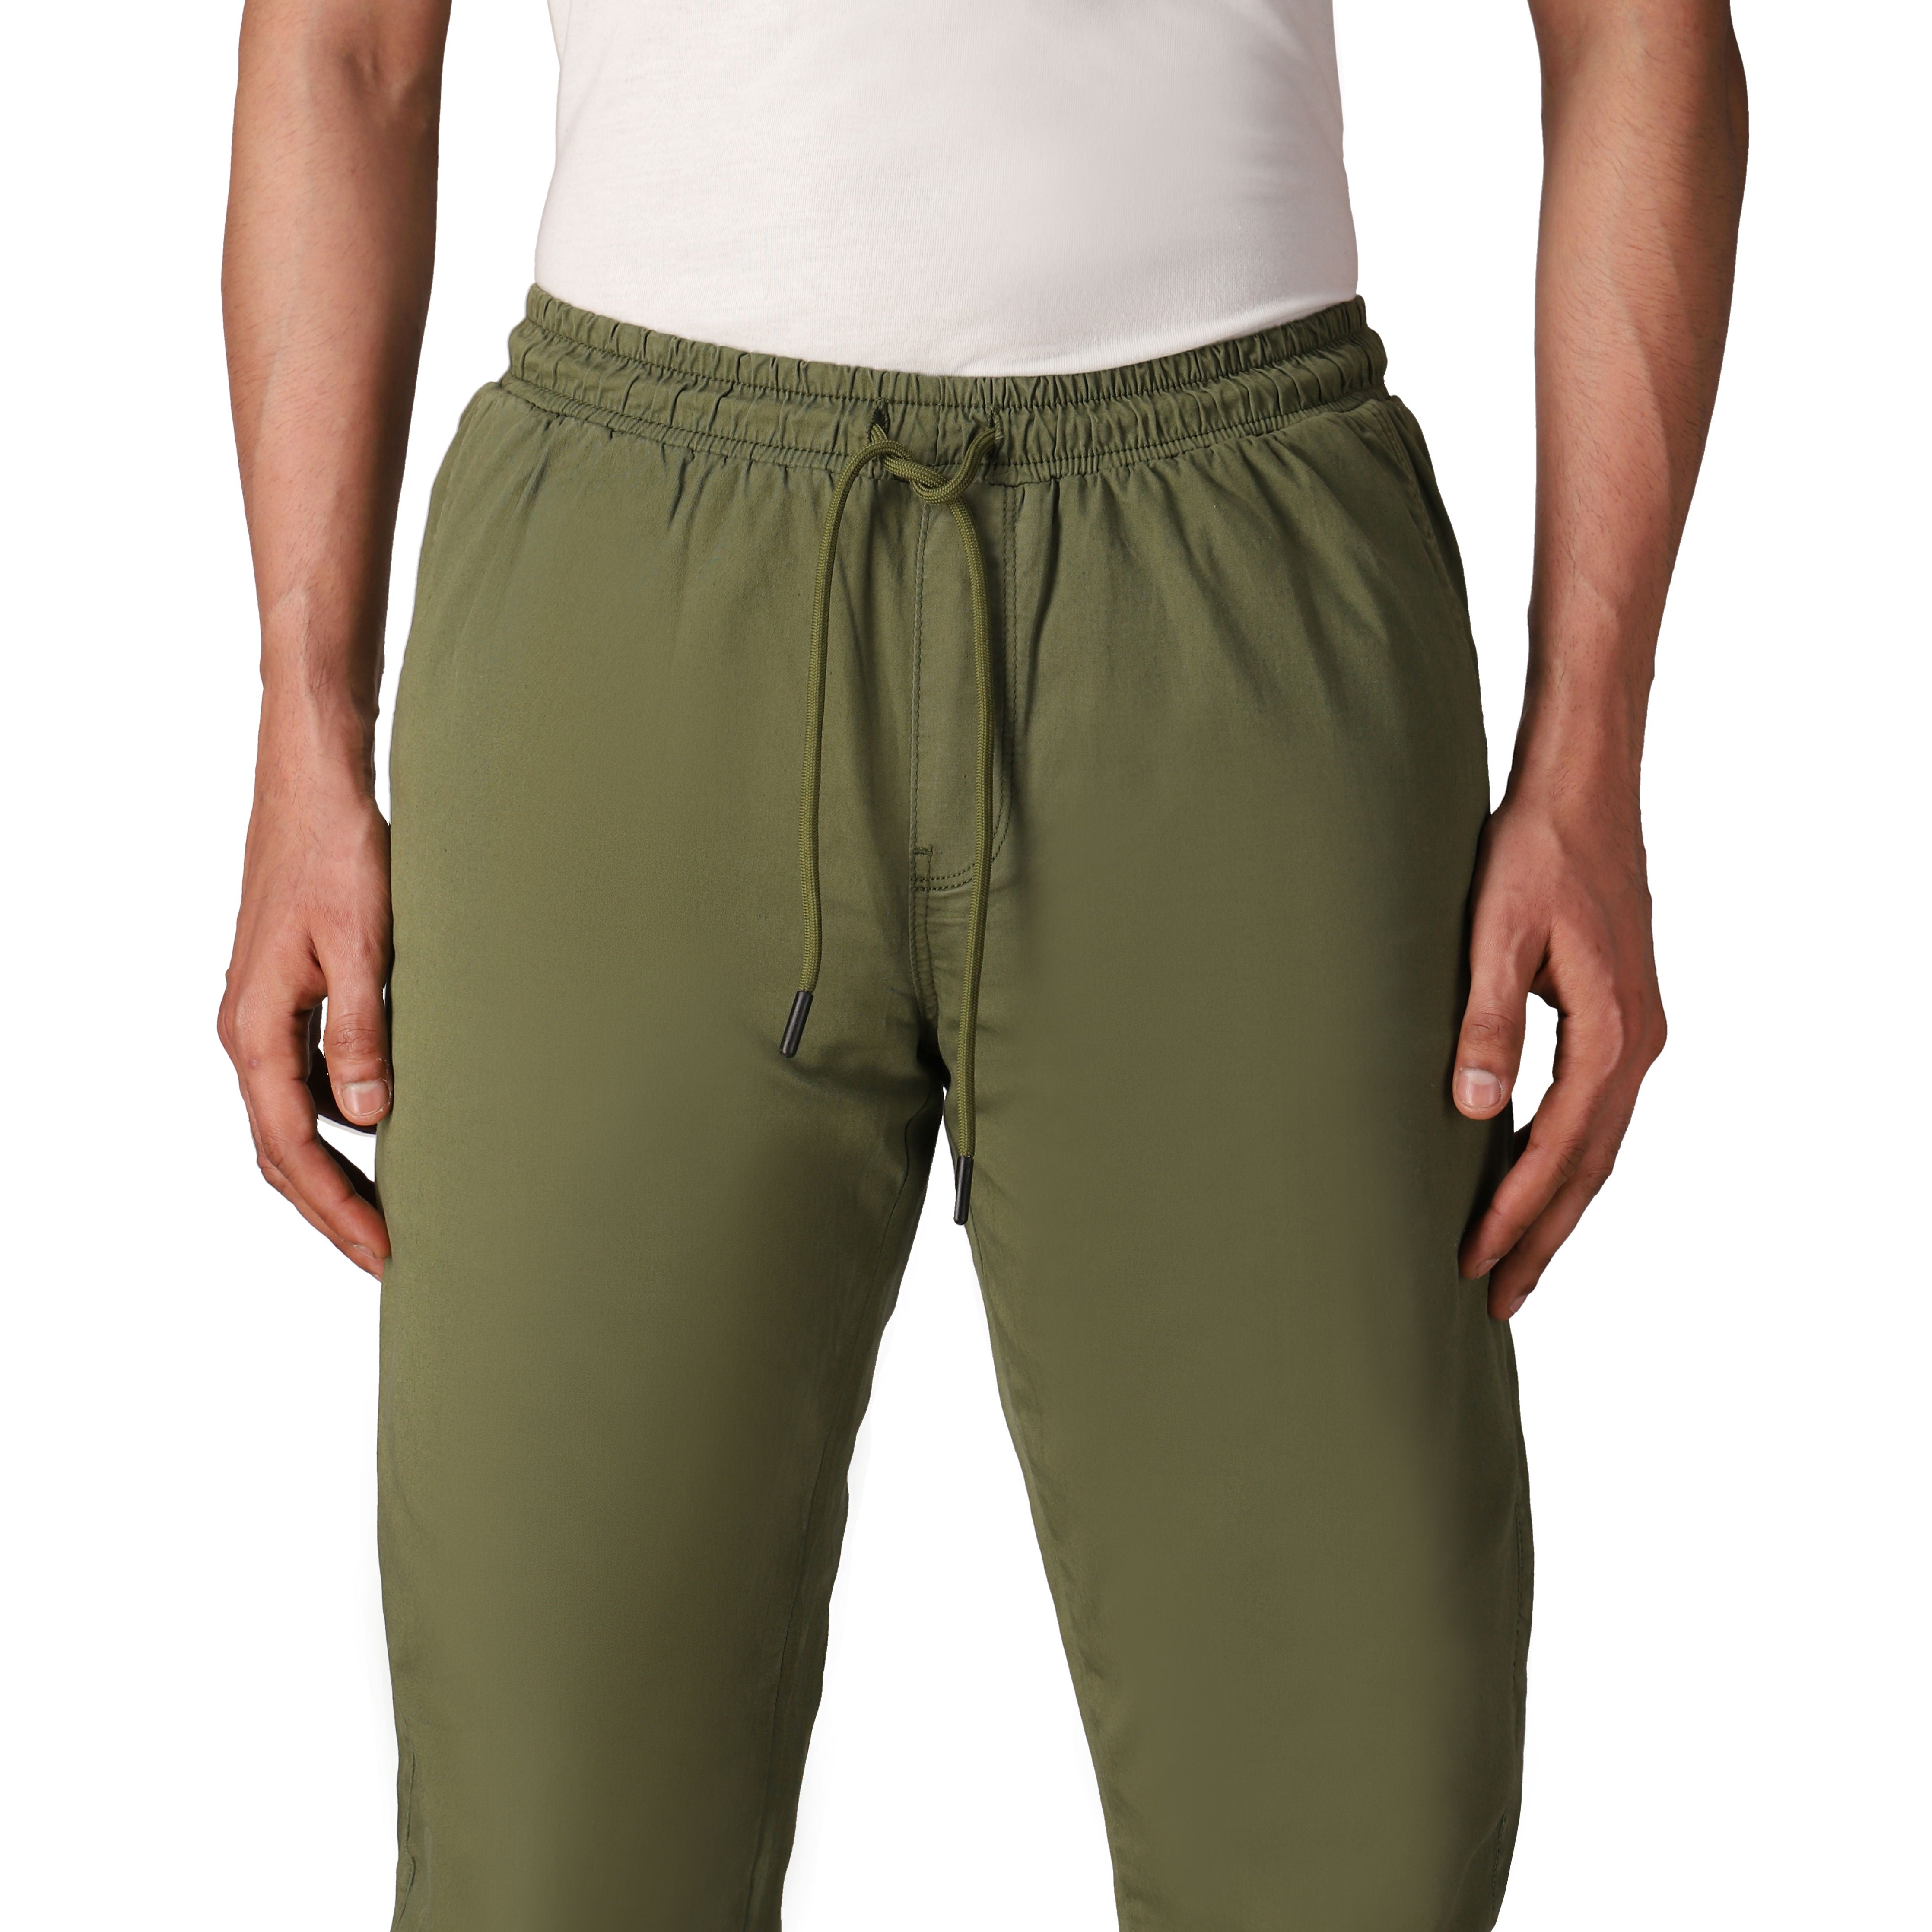 Men's Polyester-Spandex Twill Cargo-Design Track Pants / Joggers